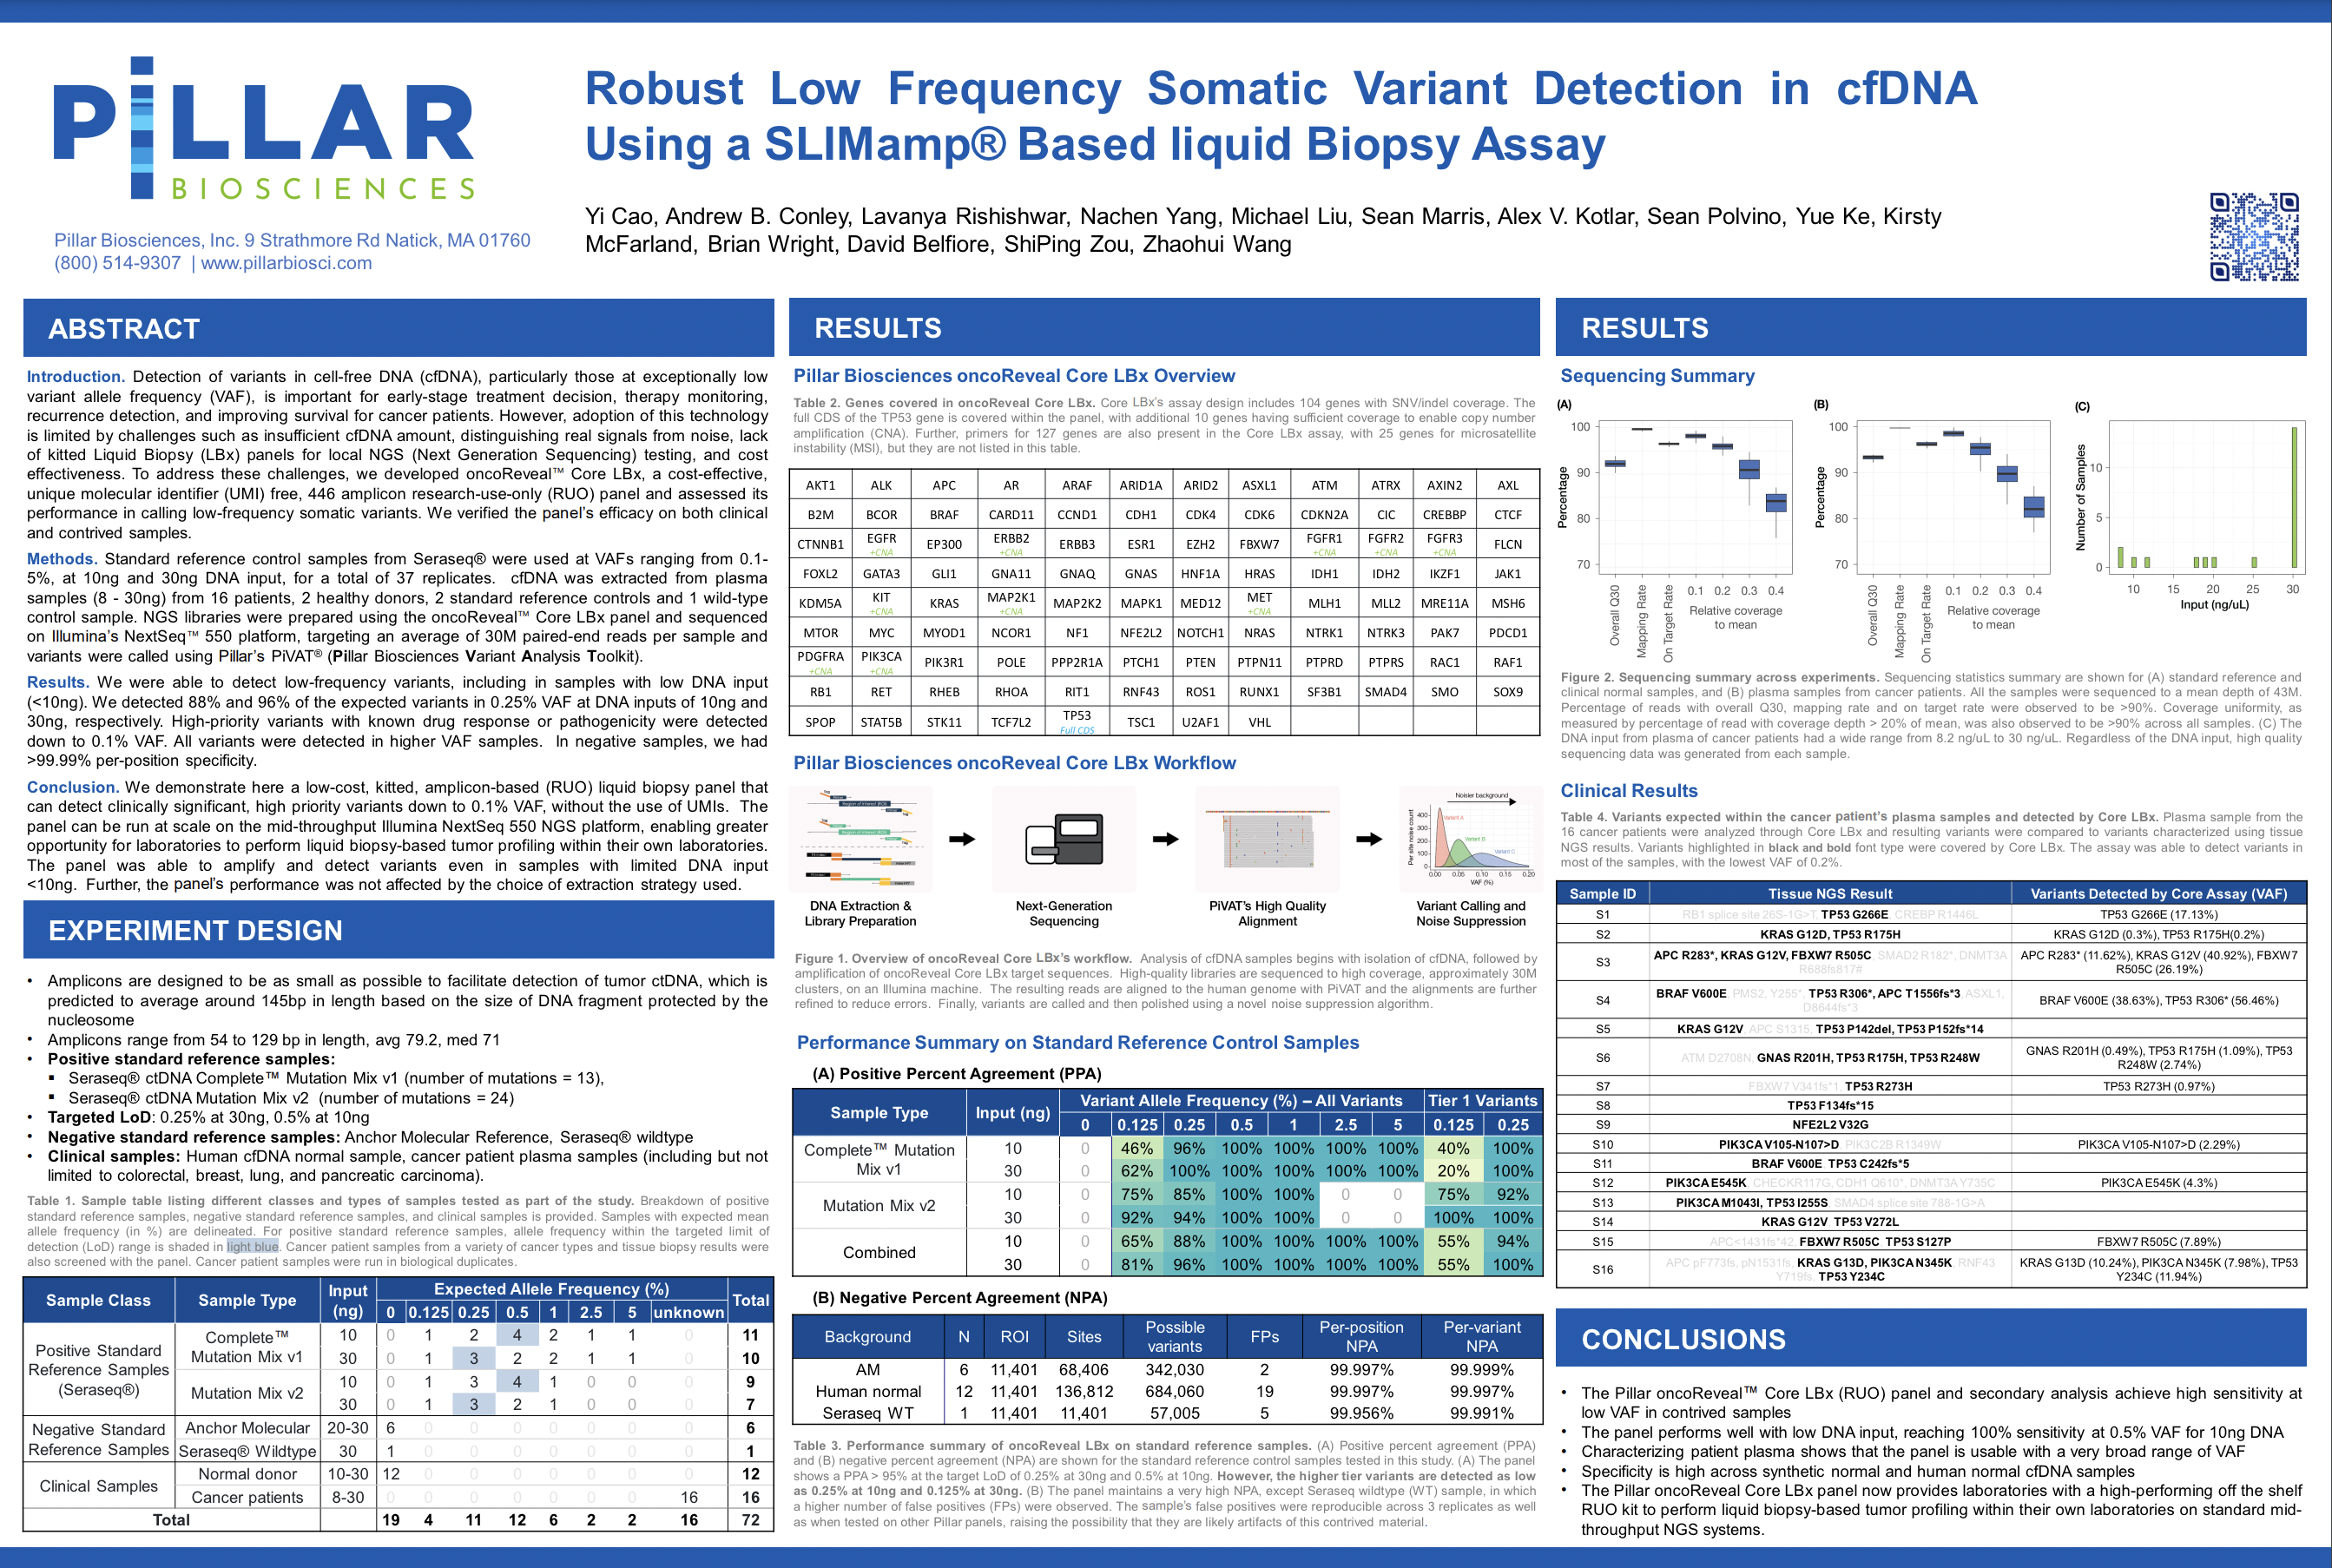 2023 AMP Cao et al Robust Low Frequency Somatic Variant Detection in cfDNA Using a SLIMamp Based Liquid Biopsy Assay